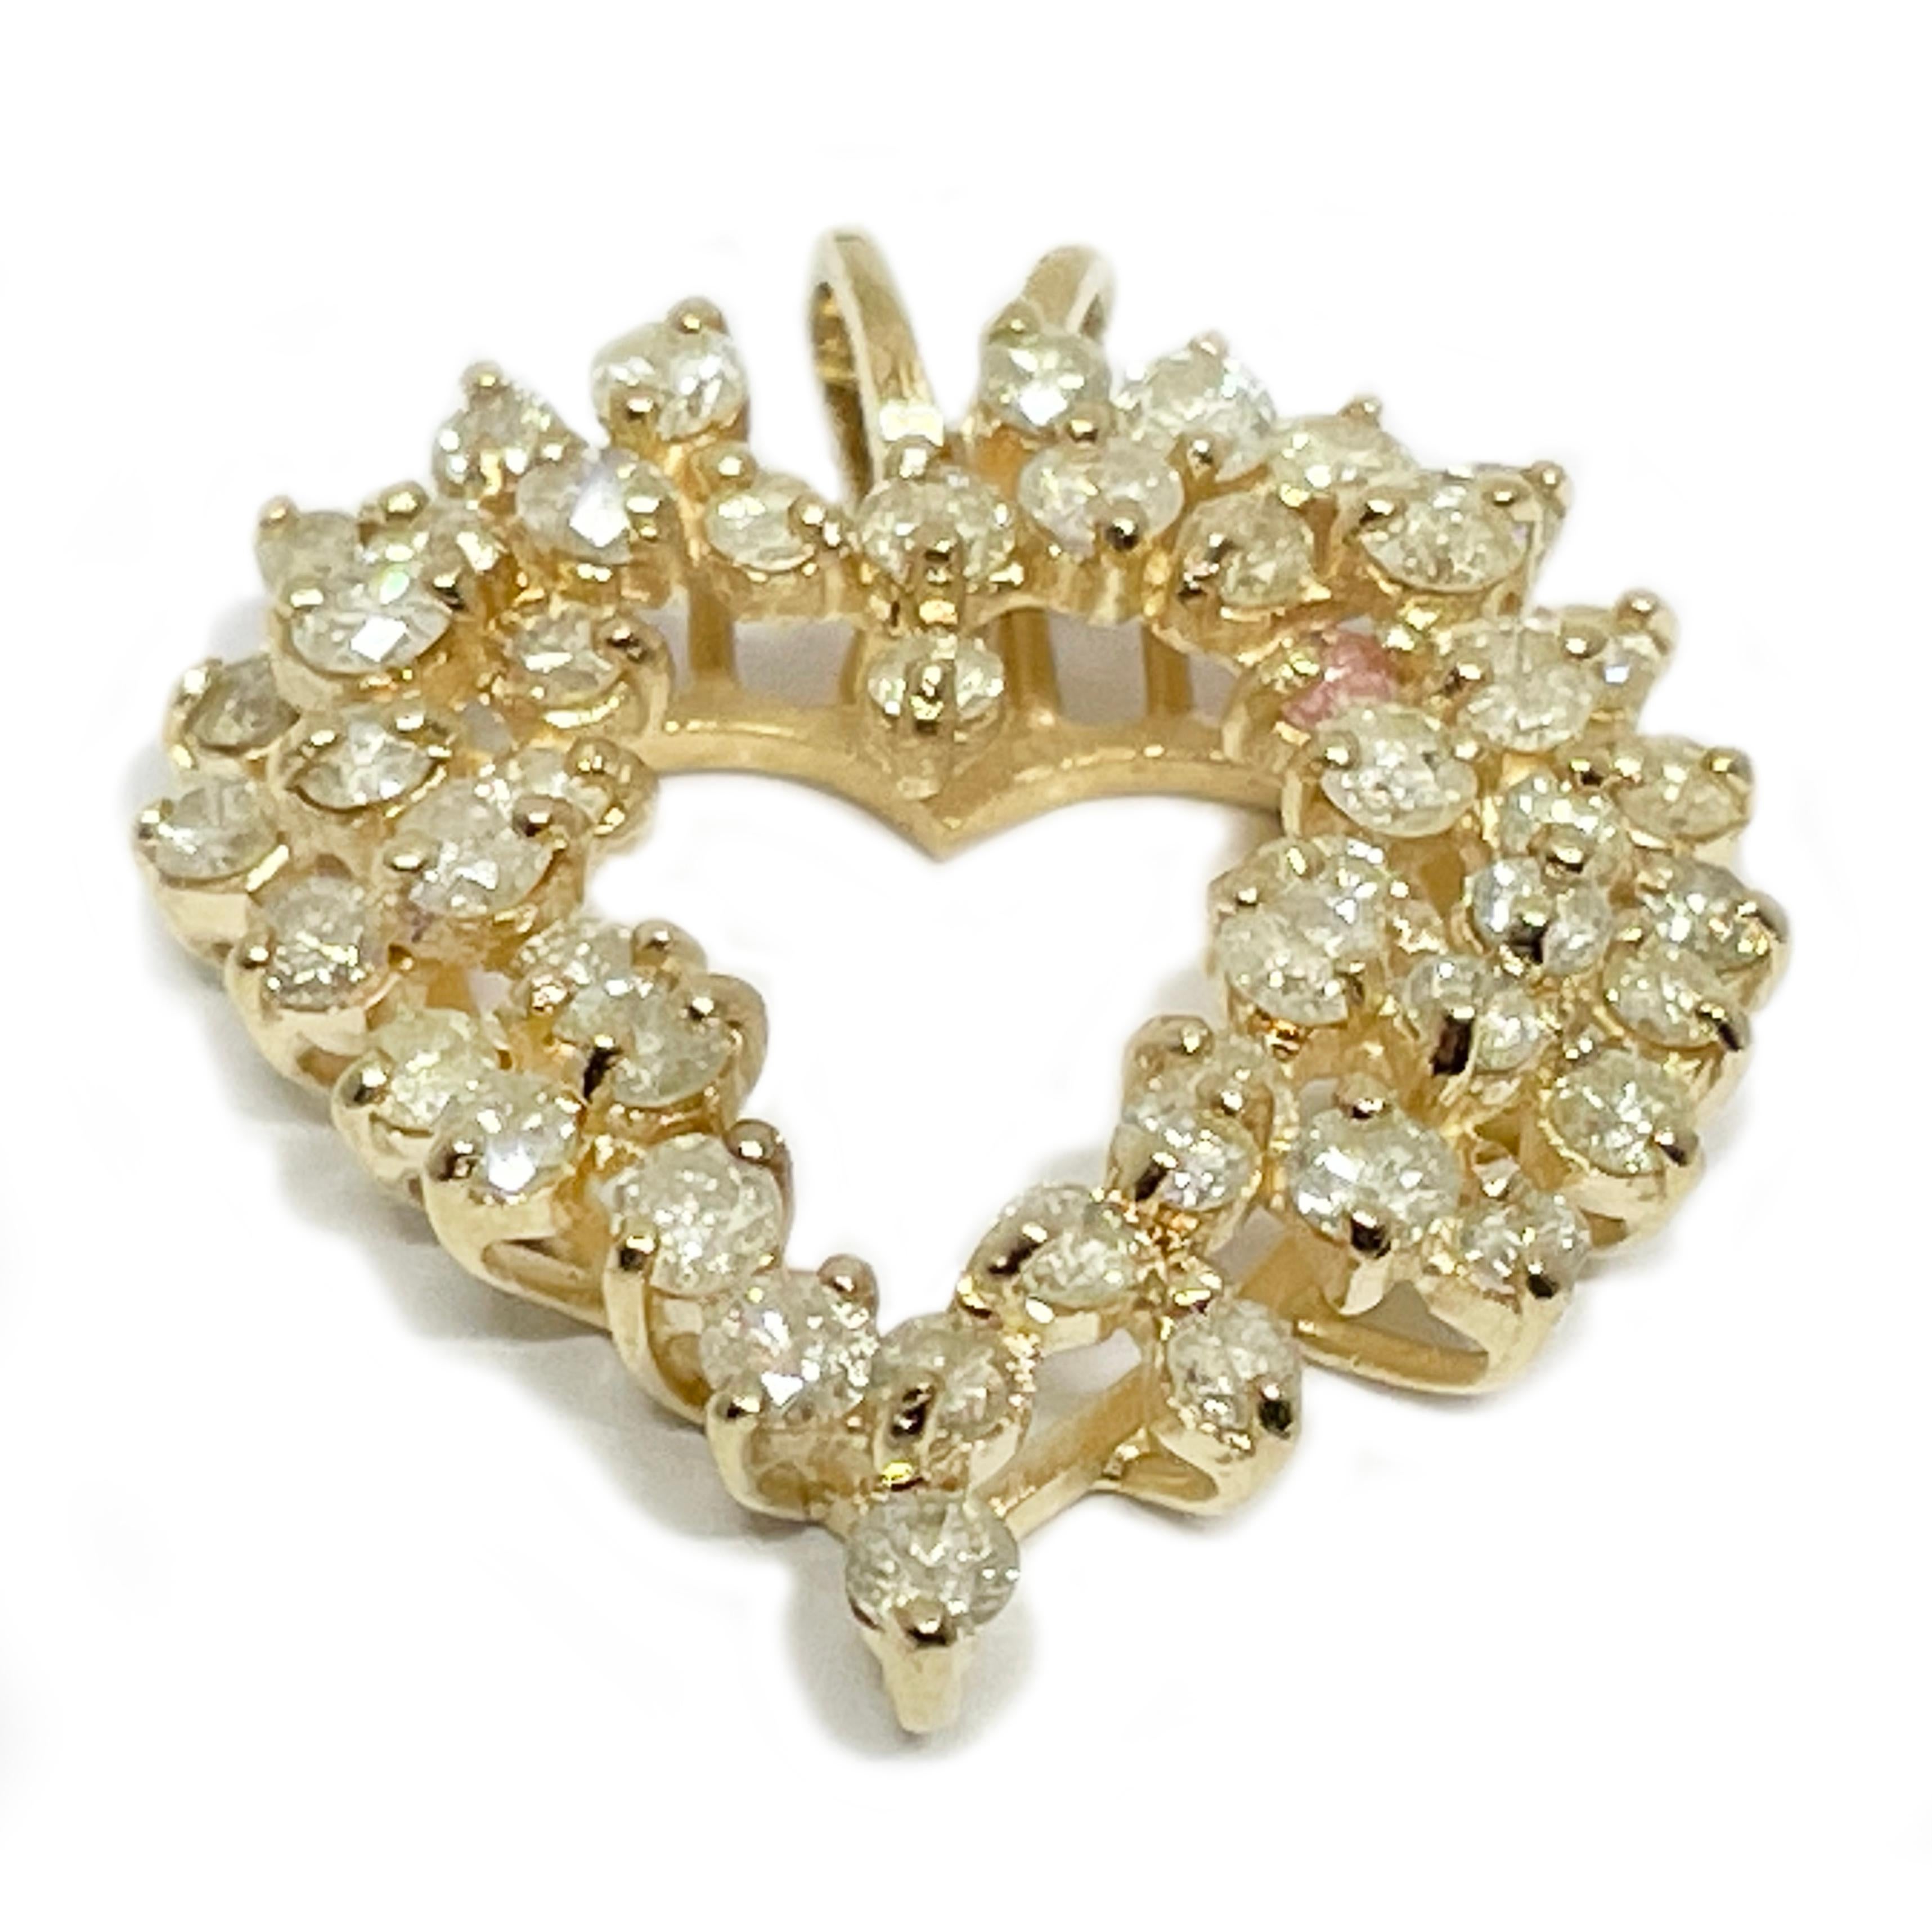 14 Karat Yellow Gold Diamond Heart Pendant. The pendant has an orgnaic heart-shape design with forty-nine white diamonds and one pink diamond. The pendant has an attached rabbit bail. The diamonds vary in size and have an approximate carat total